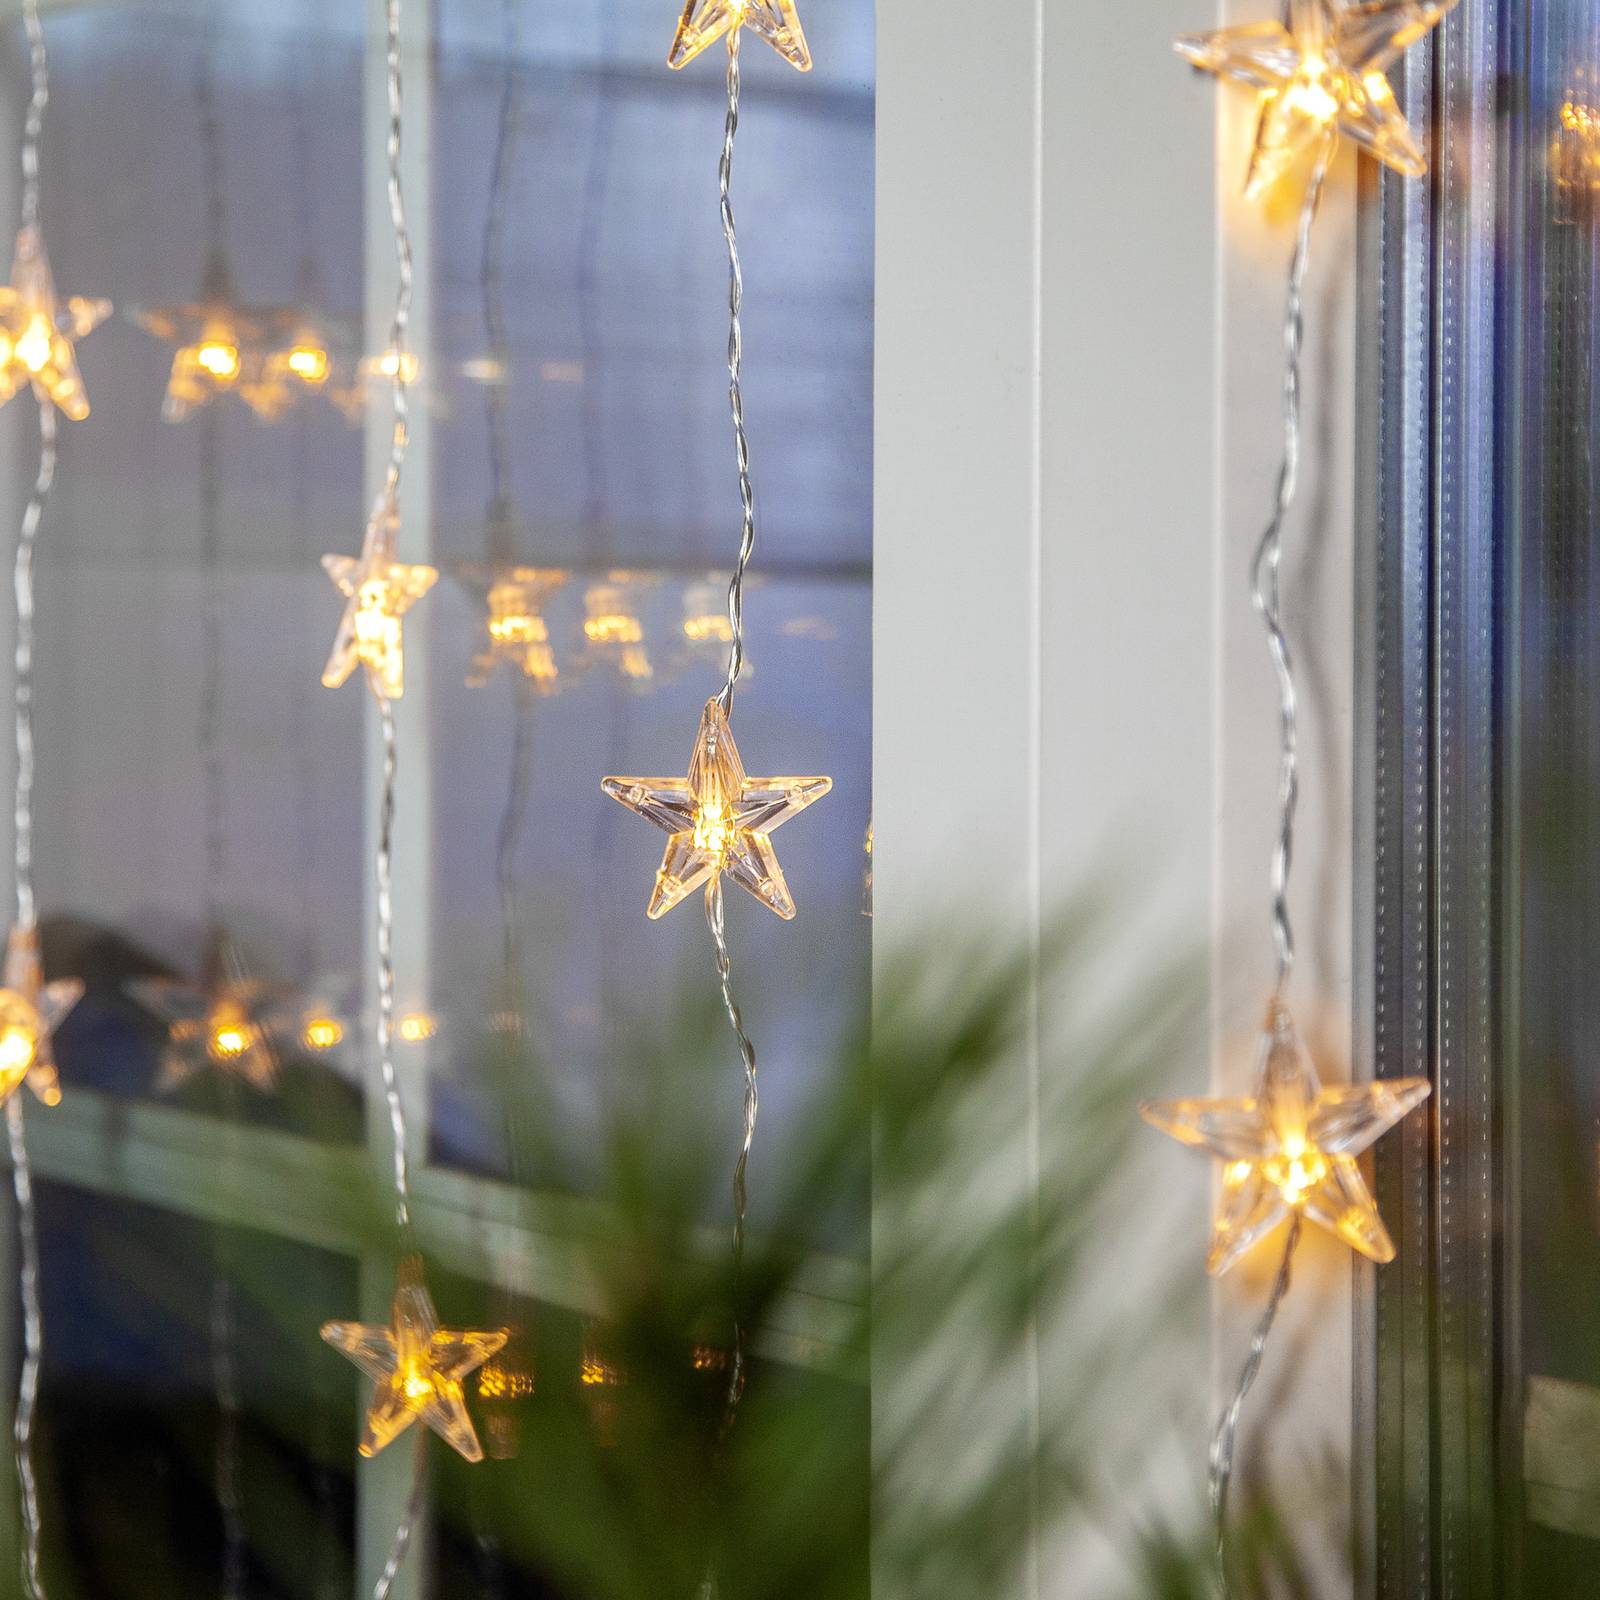 star trading rideau lumineux led star curtain à 30 lampes